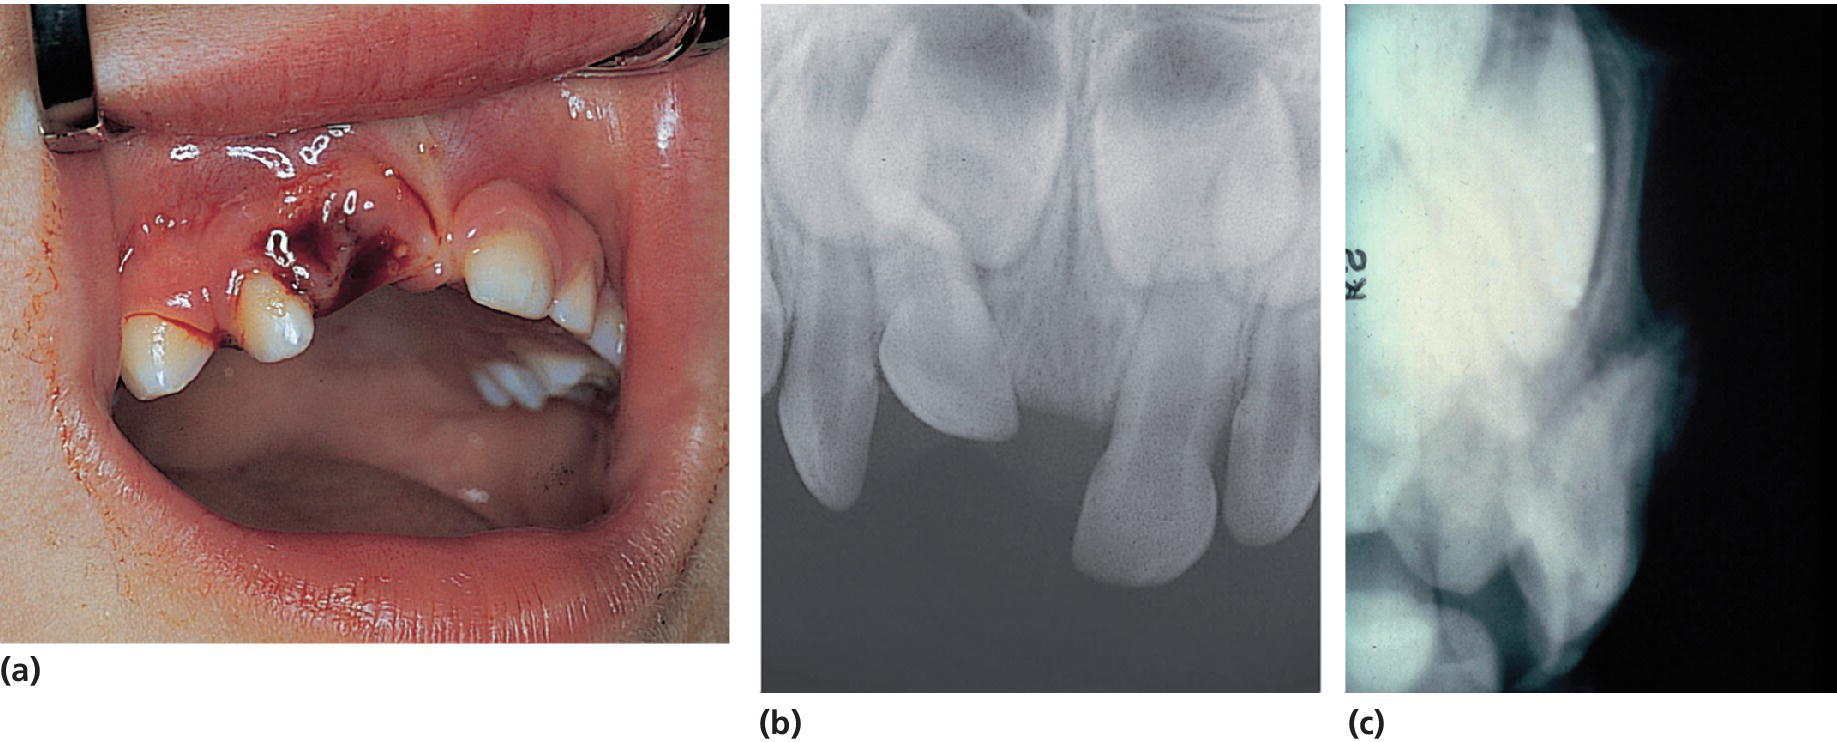 Photo of severe intrusive luxation of the primary right central incisor (a), radiograph of occlusal exposure with foreshortening of intruded tooth (b), and lateral radiograph of apex of intruded incisor (c).